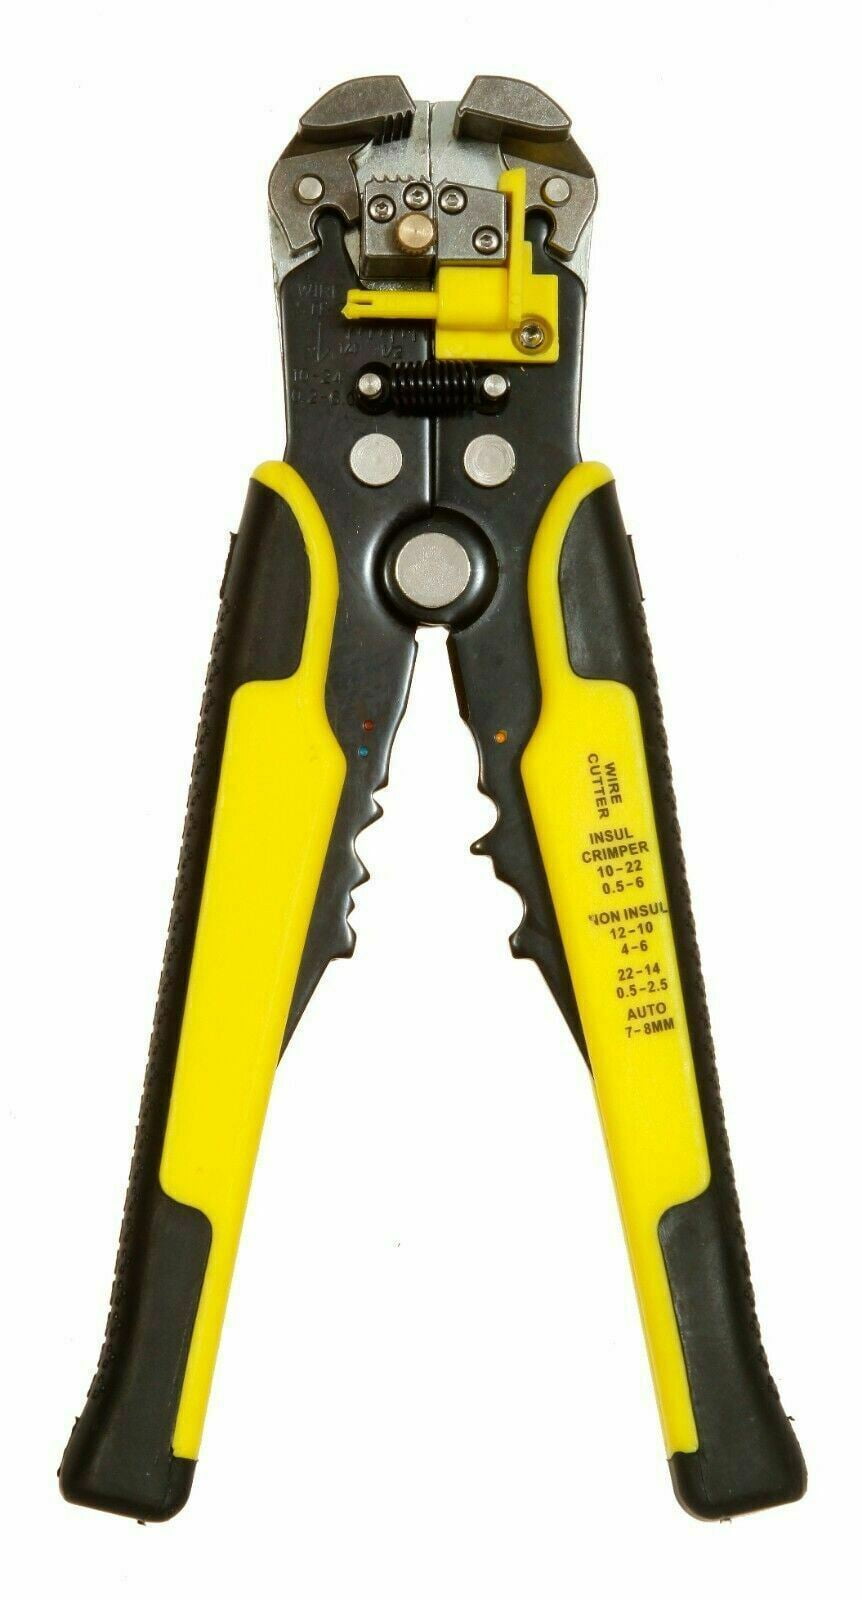 Self Adjustable Automatic Cable Wire Crimper Crimping Tool Stripper Plier Cutter 